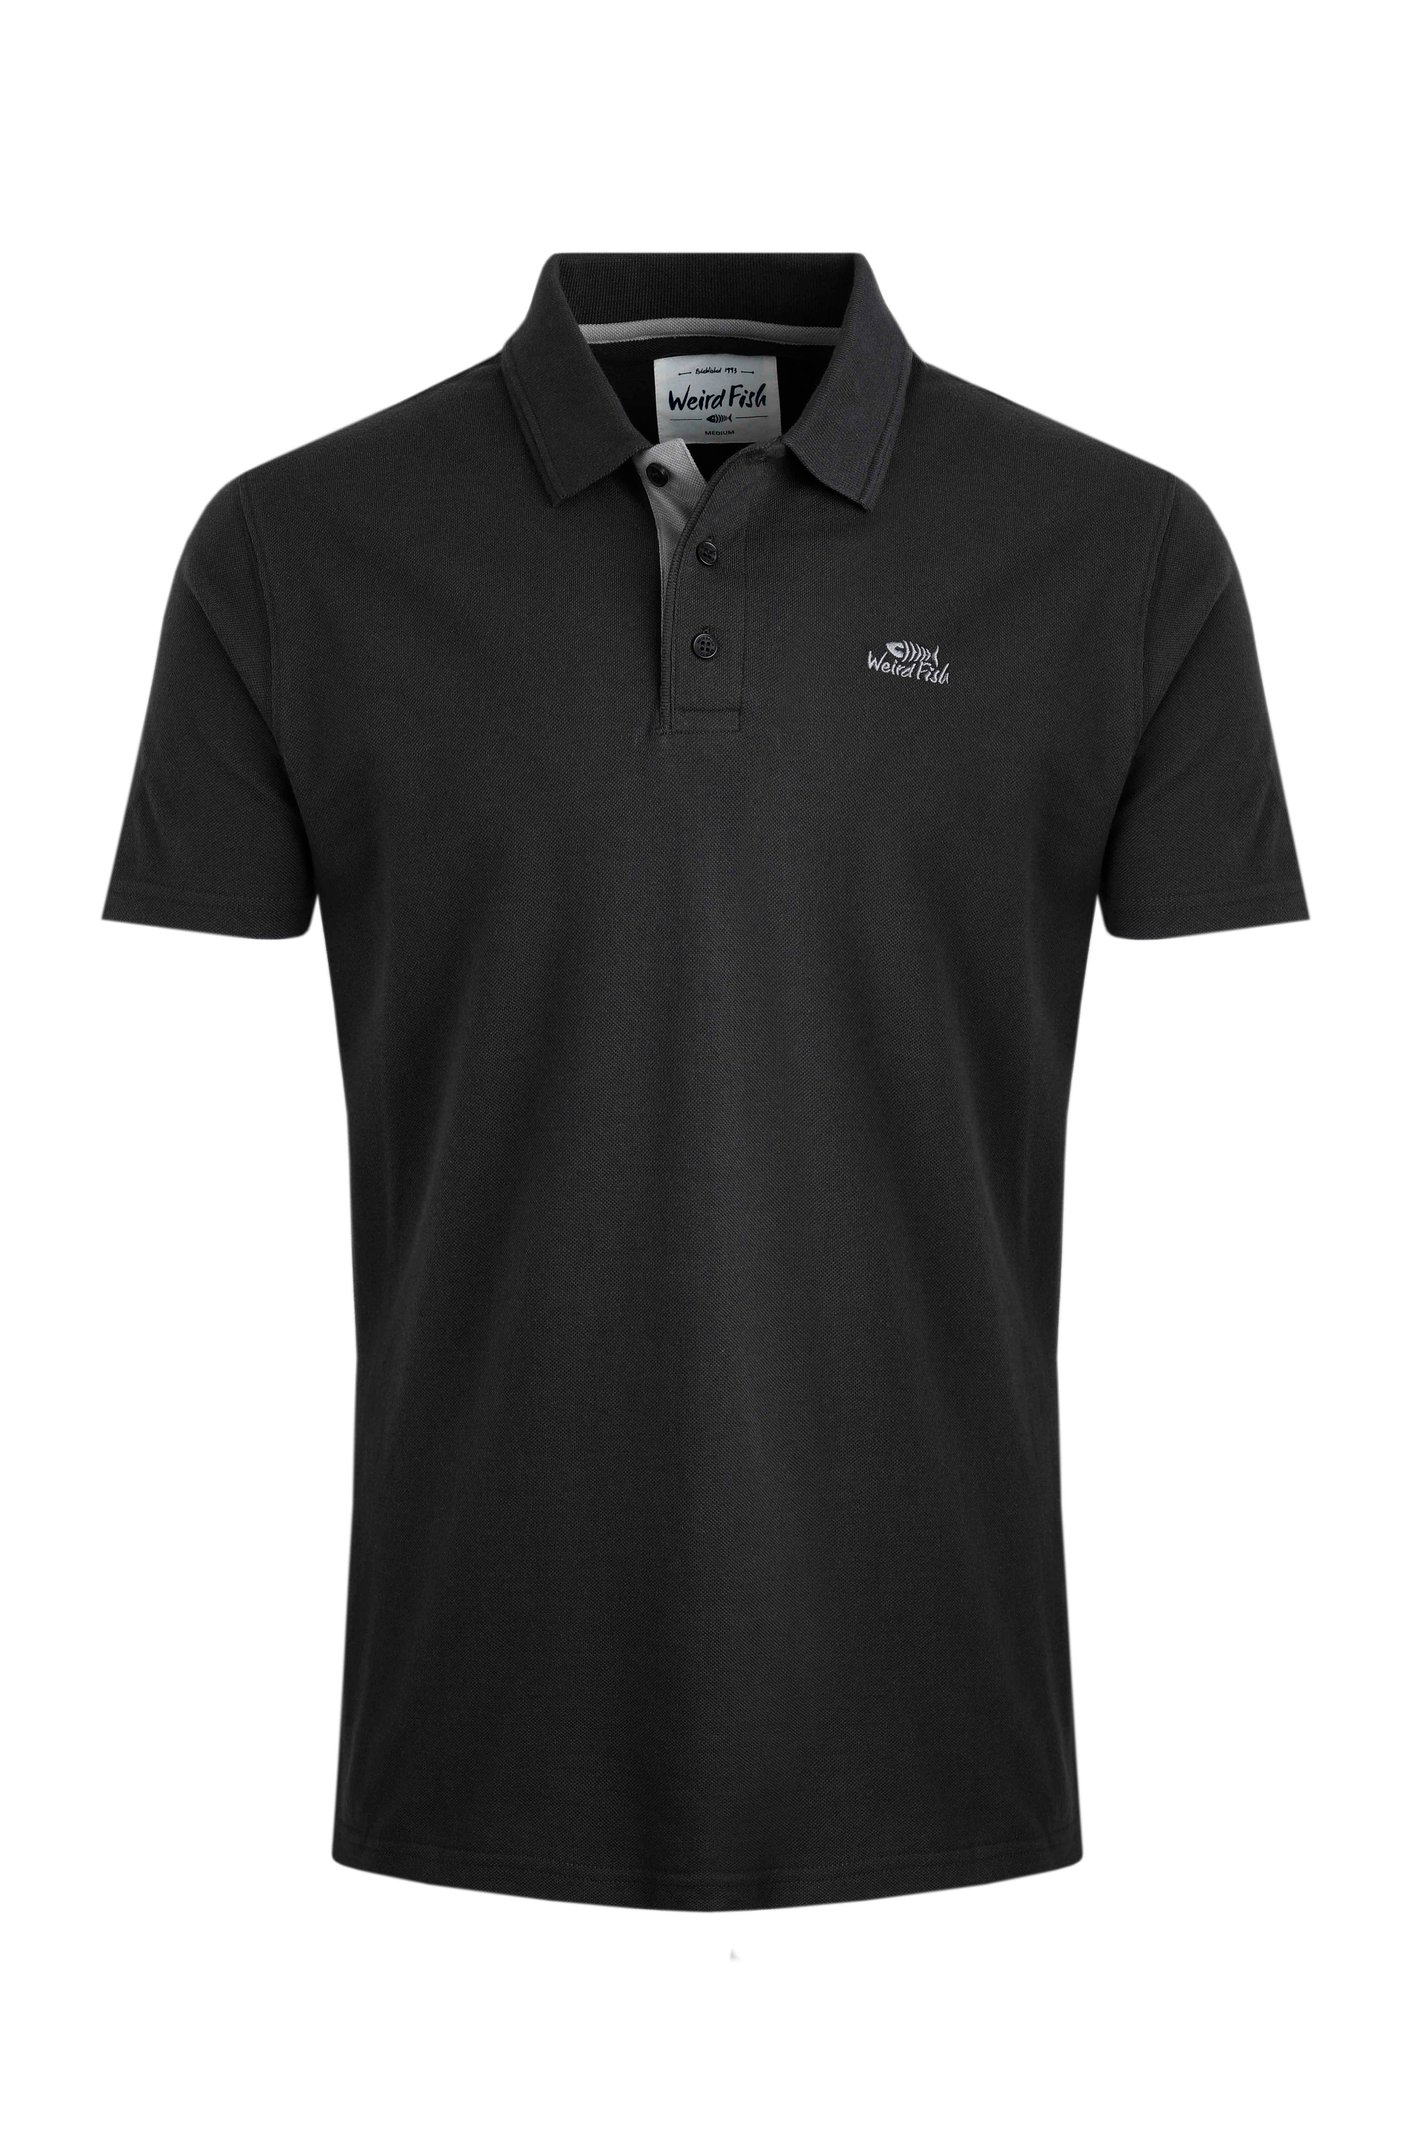 Weird Fish Miles Organic Pique Polo Washed Black Size 2XL